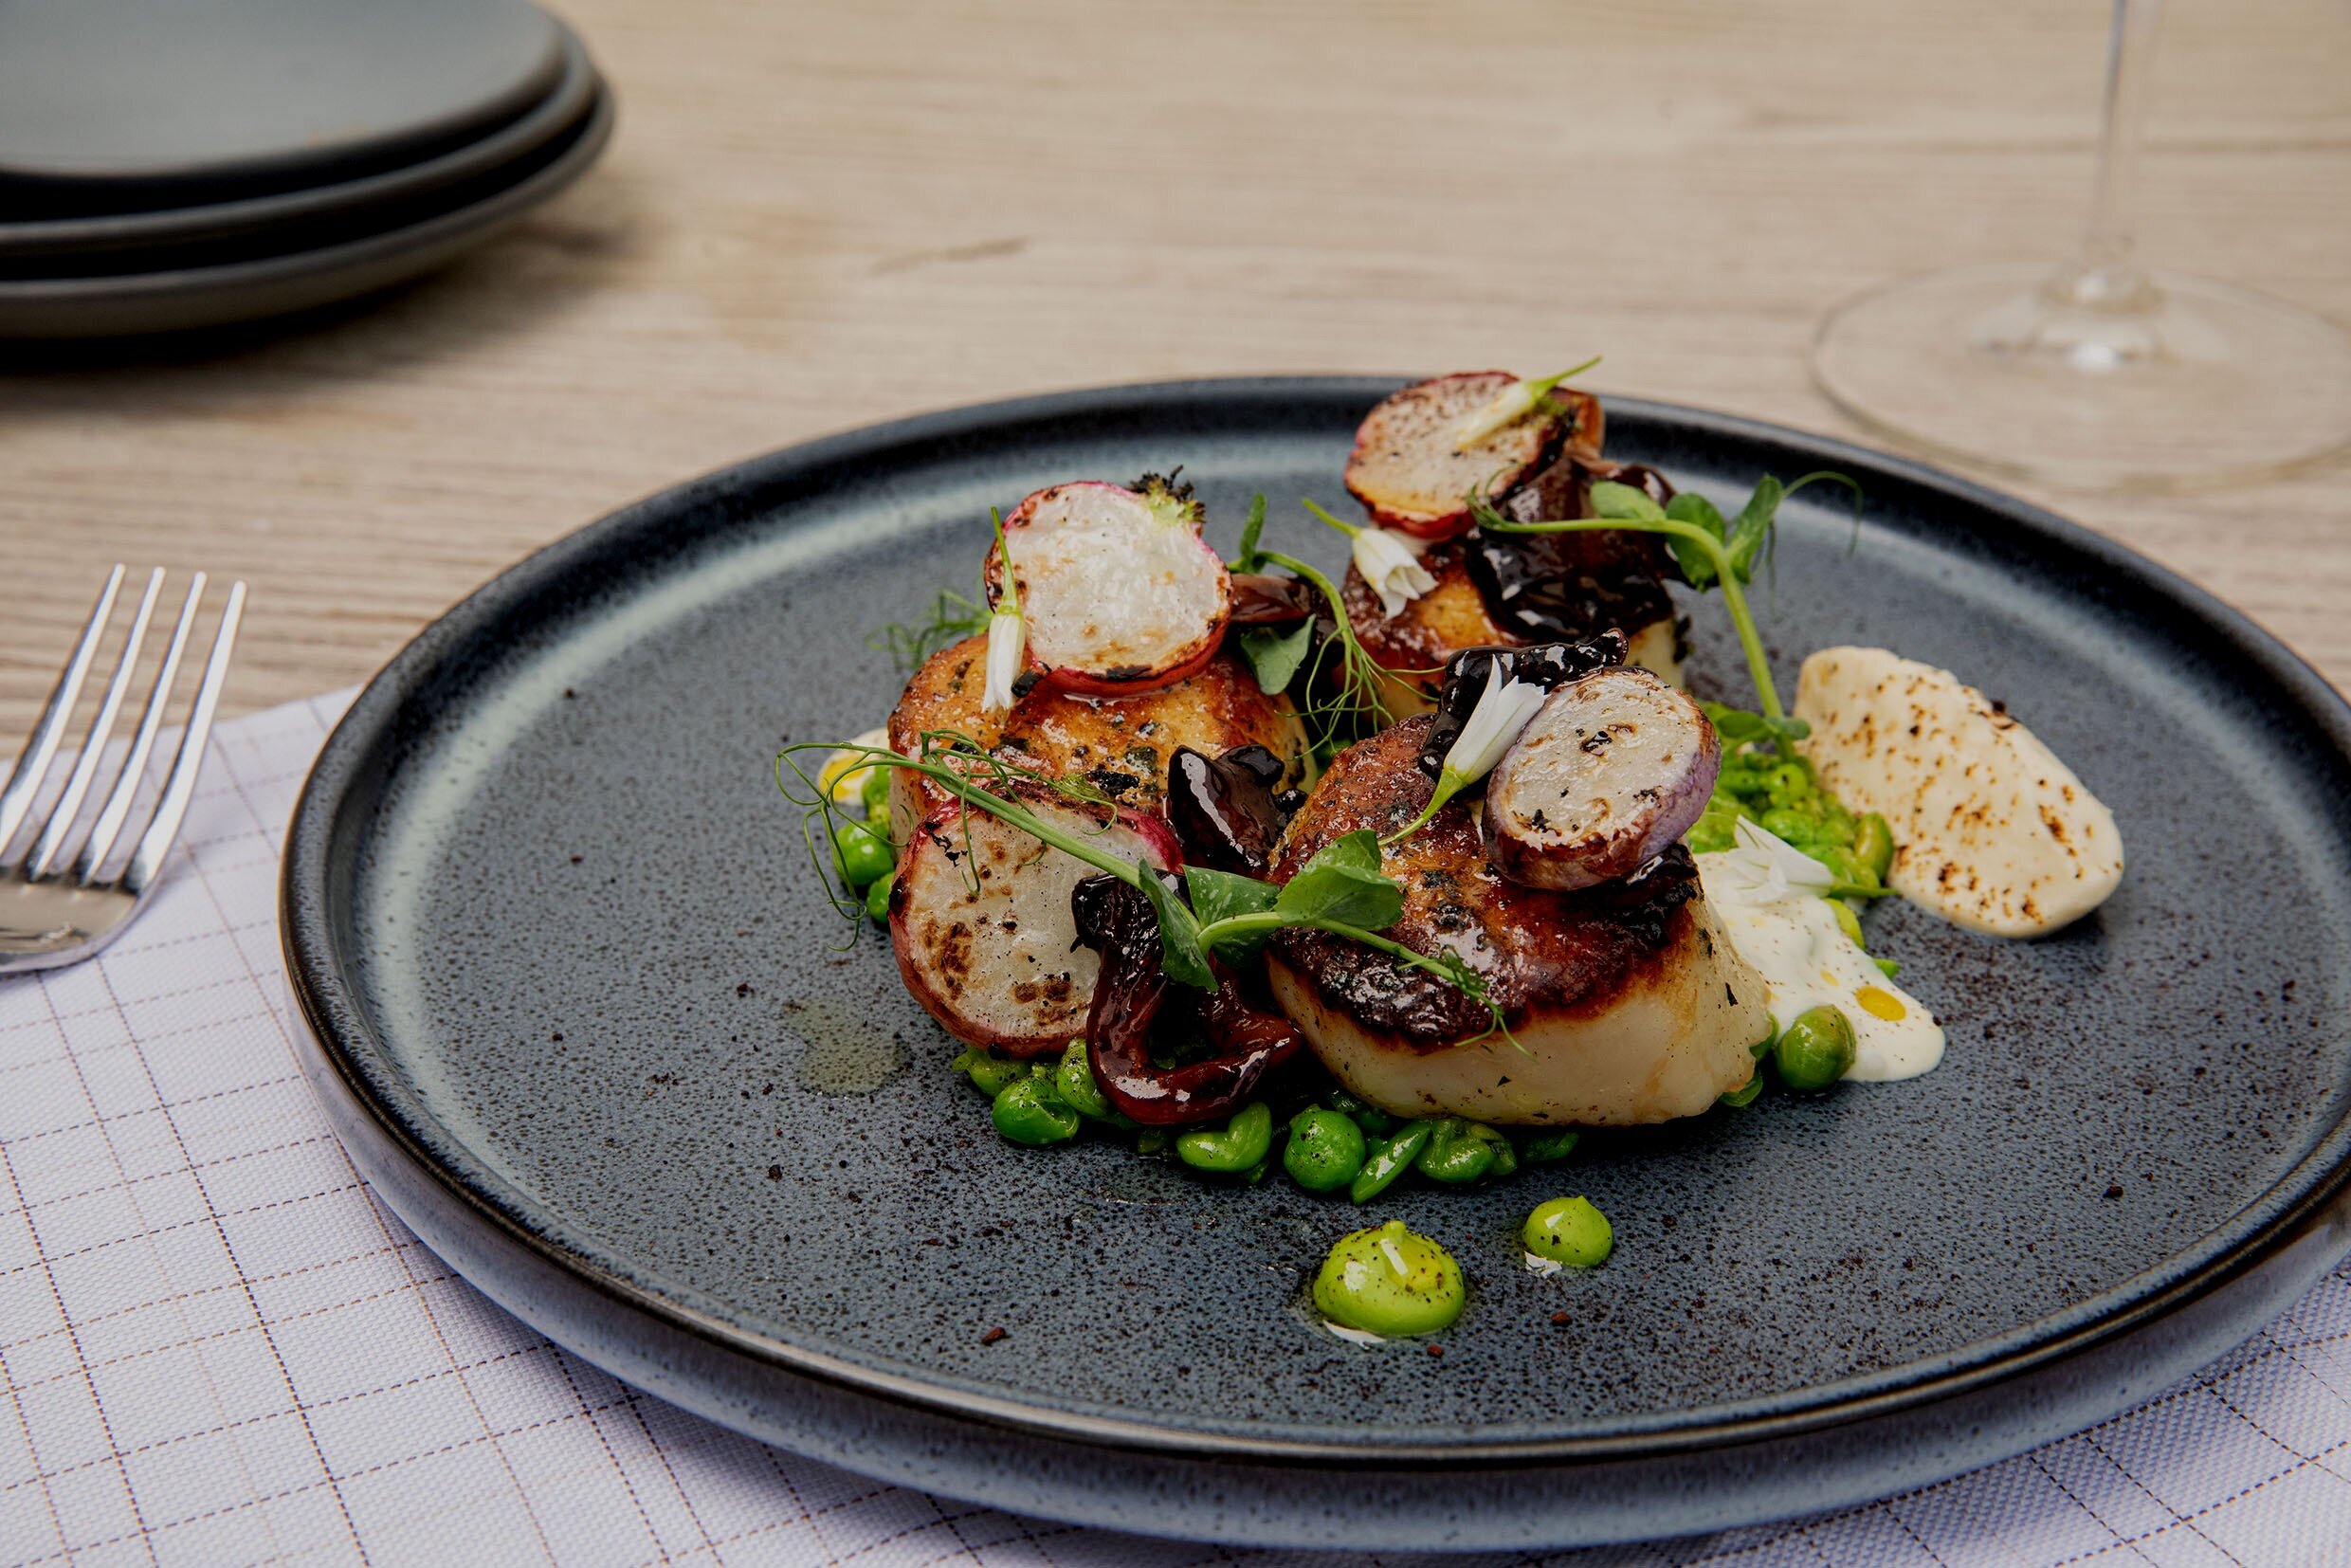 Seared scallops on a black plate surrounded by seared radishes, peas, and pea greens.